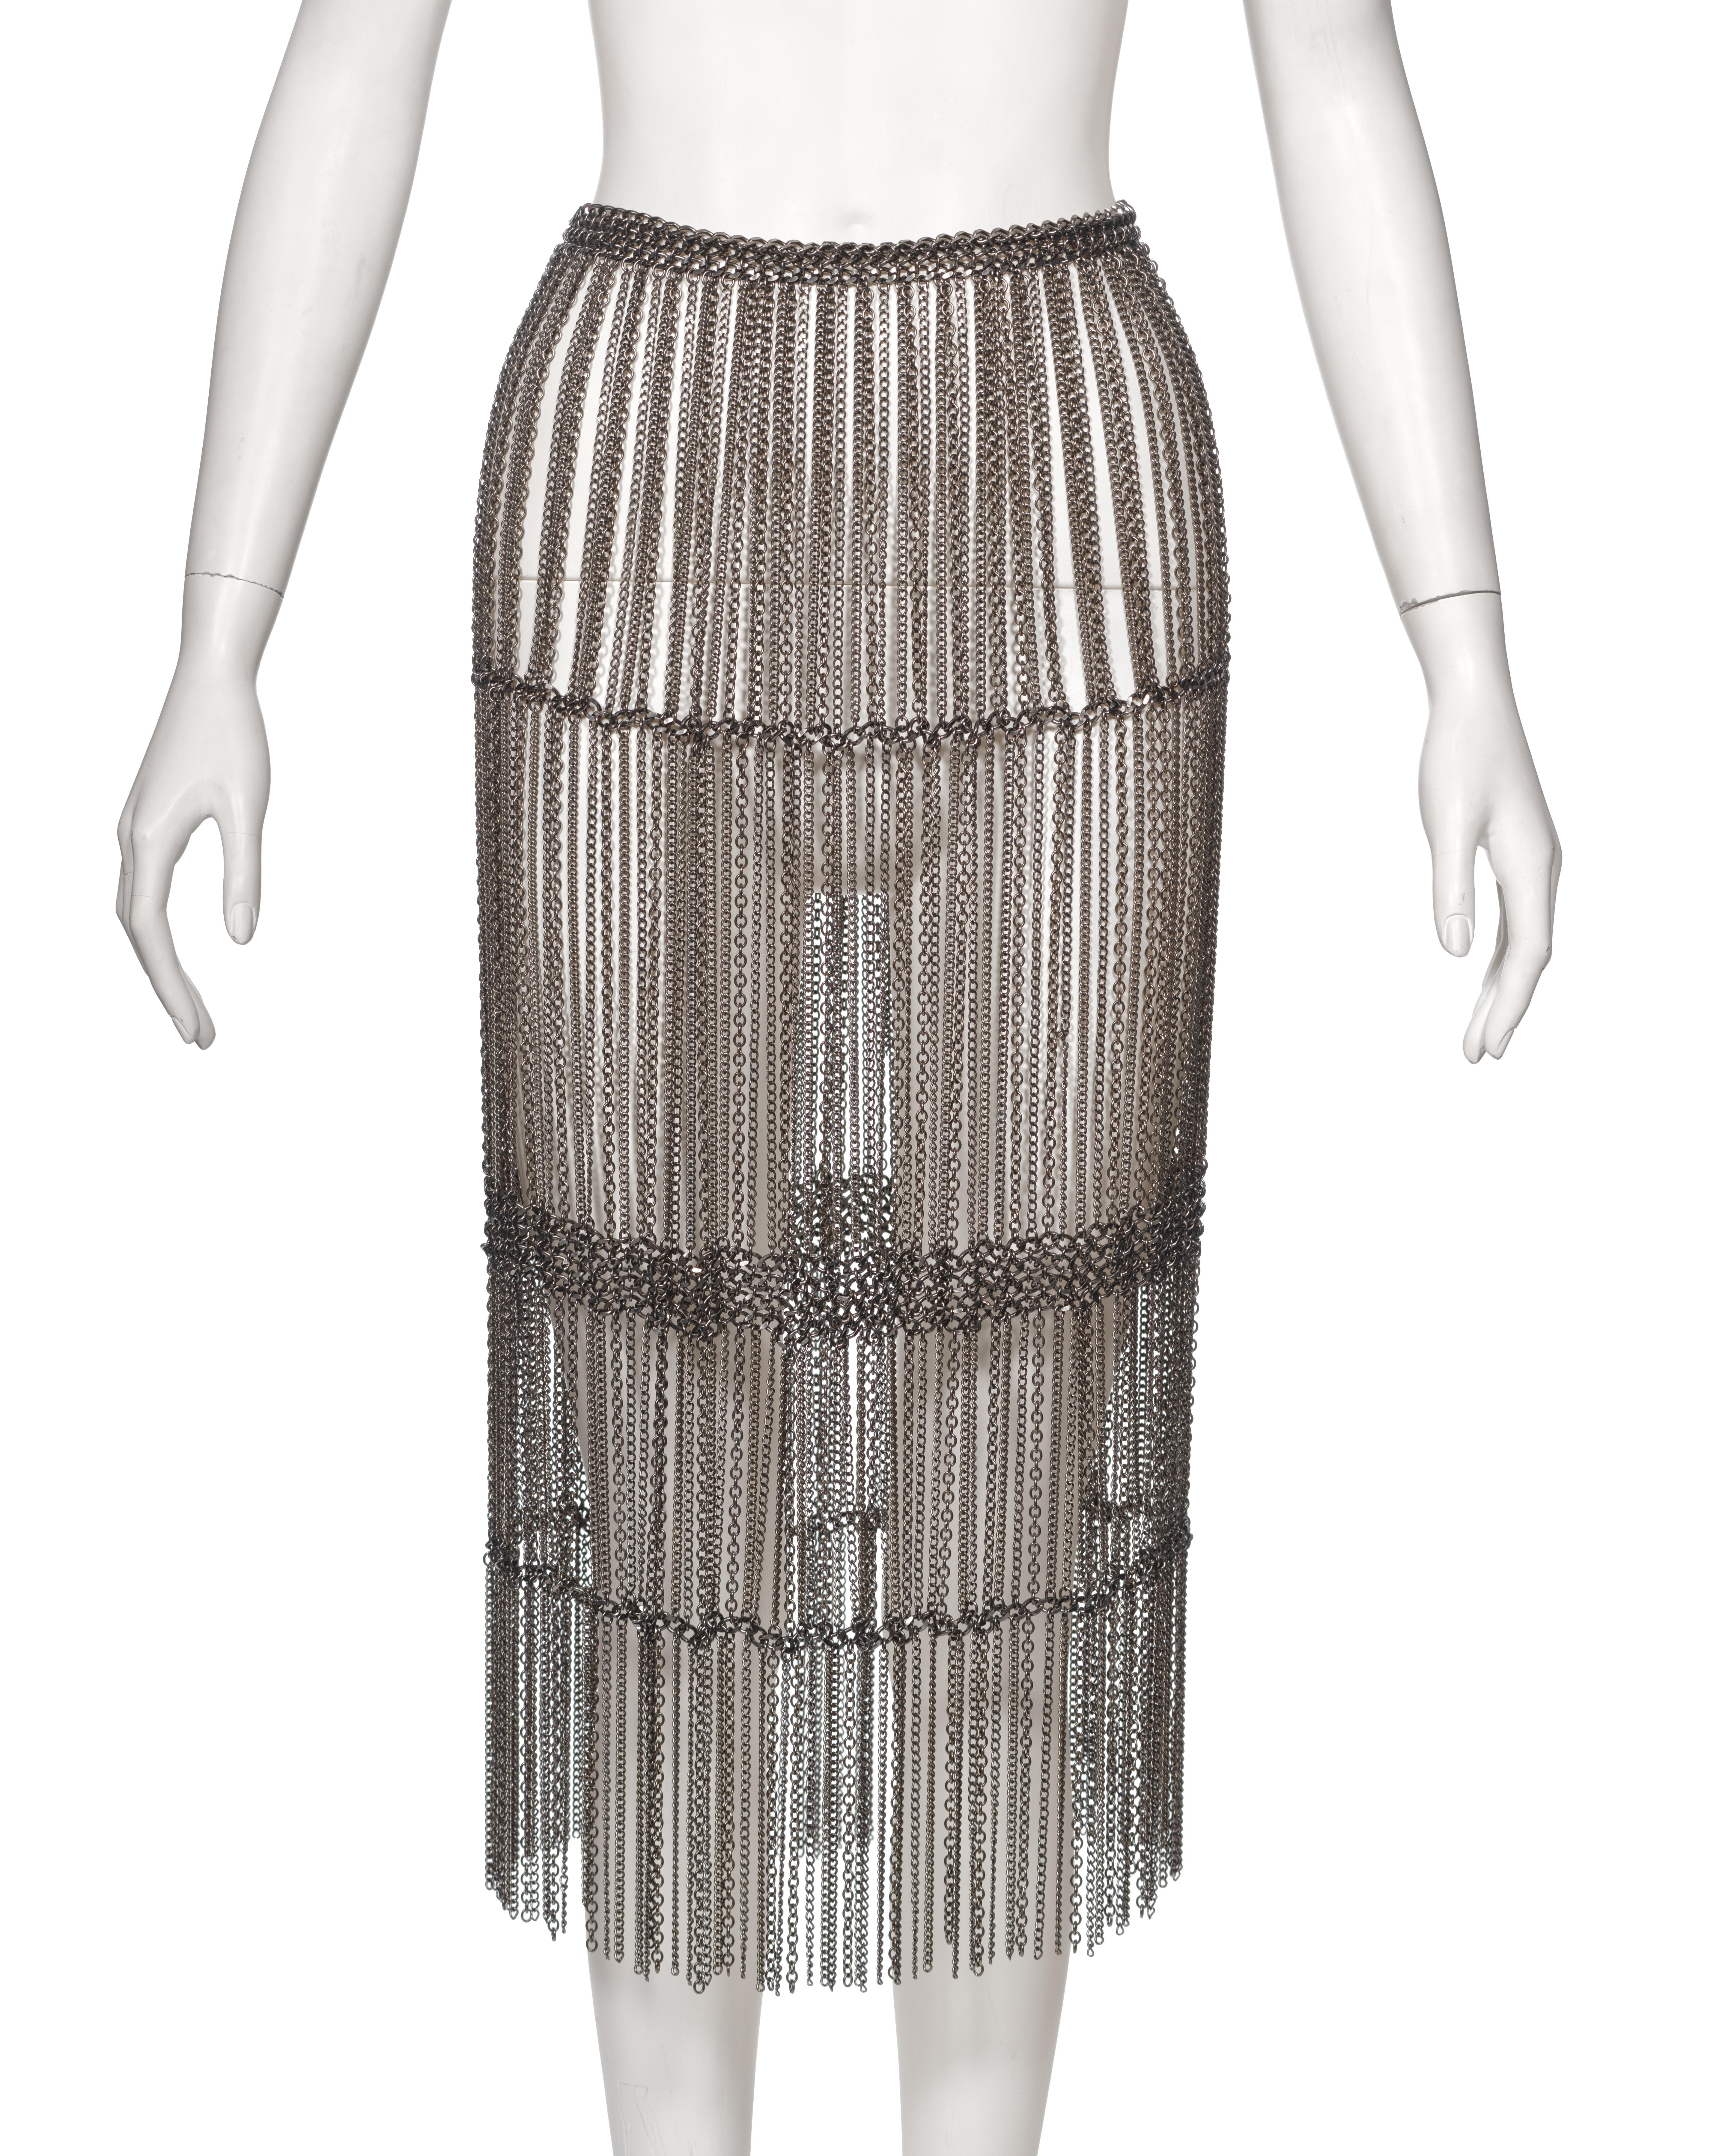 ▪ Archival Prada Metal Chain Fringed Skirt
▪ Creative Director: Miuccia Prada
▪ Fall-Winter 2002
▪ Sold by One of a Kind Archive
▪ Crafted from silver-tone metal chains
▪ Robust heavyweight construction
▪ High-waisted fit for a flattering